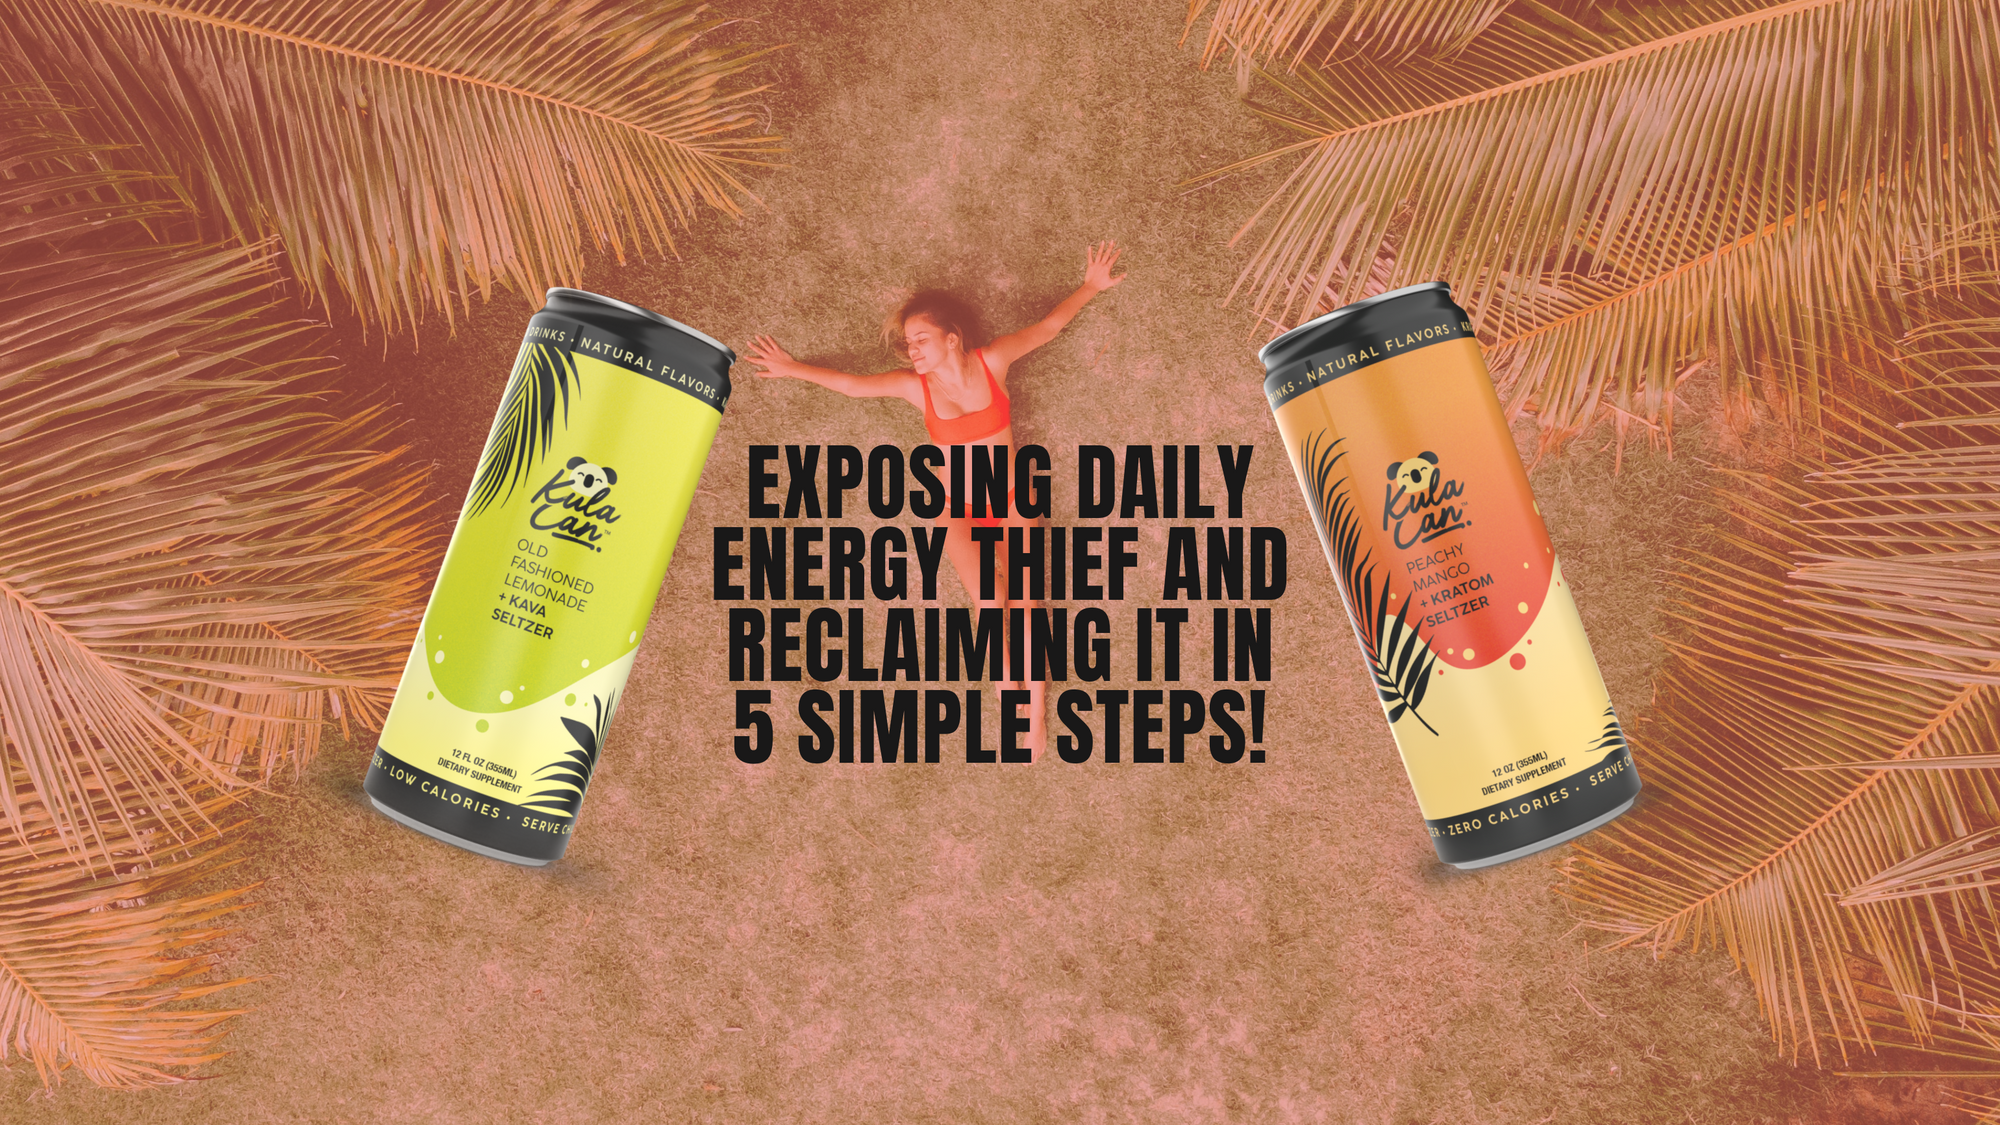 Exposing Daily Energy Thief and Reclaiming it in 5 Simple Steps!